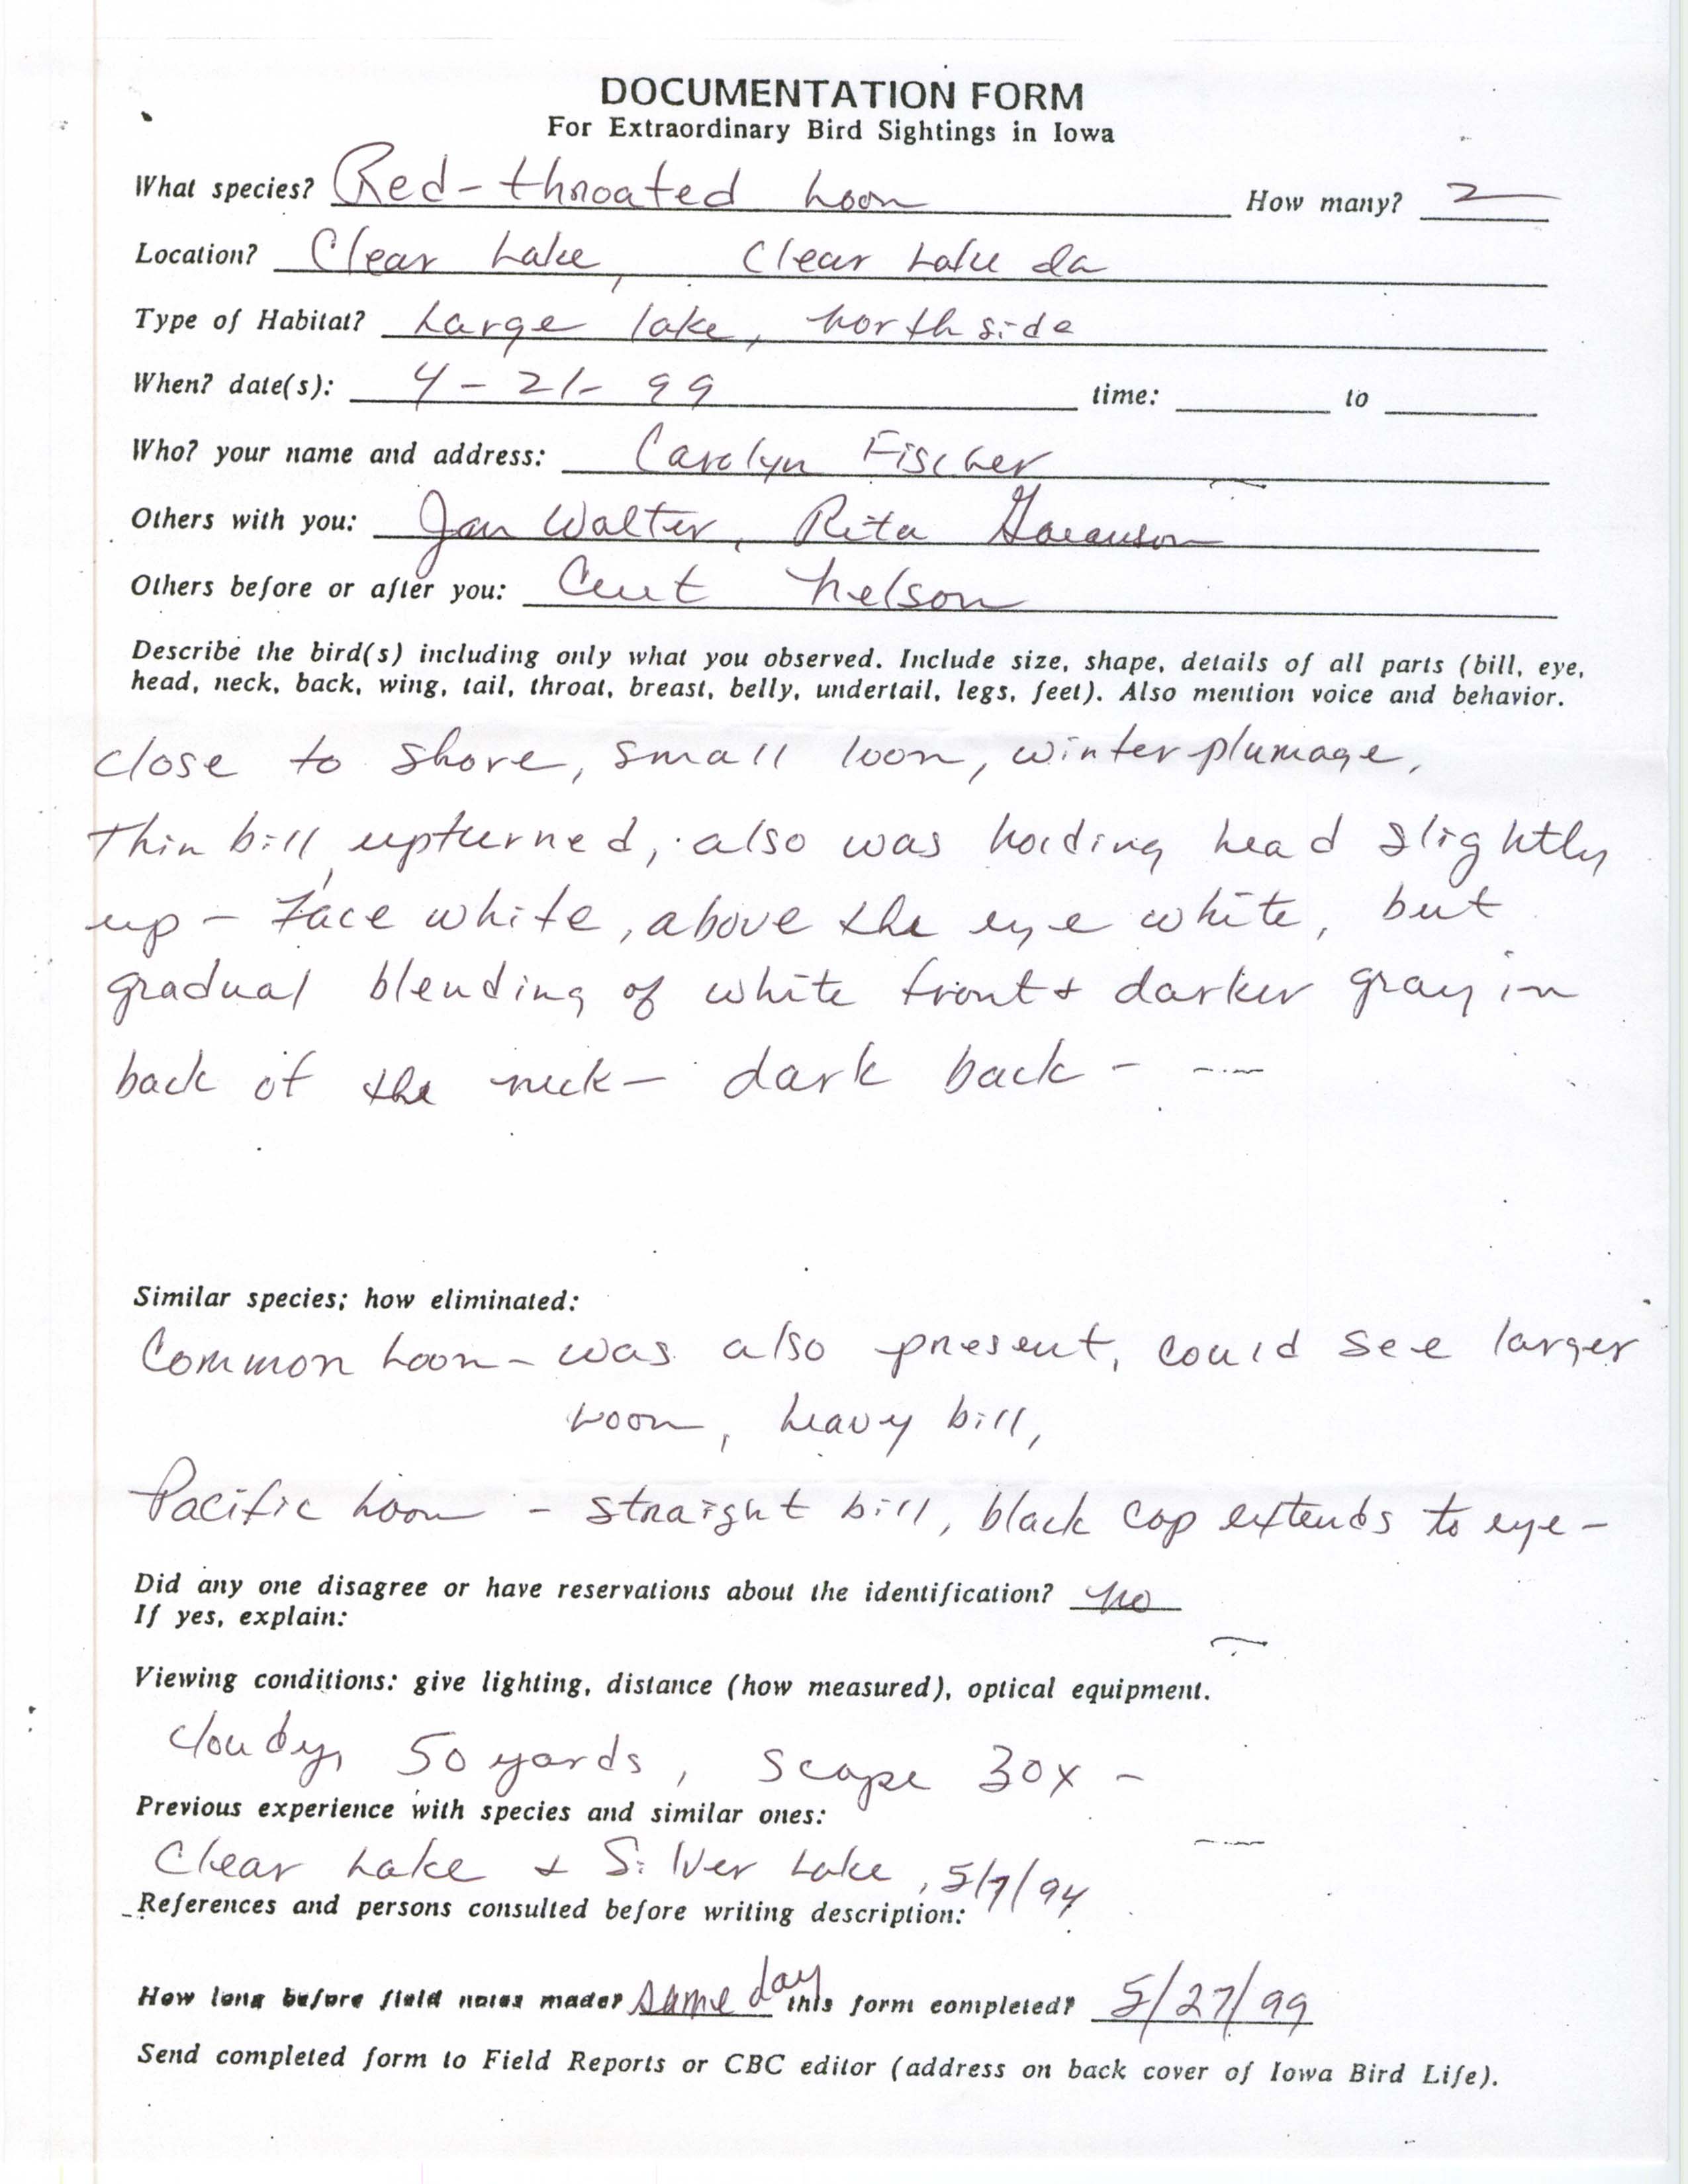 Rare bird documentation form for Red-throated Loon at Clear Lake, 1999